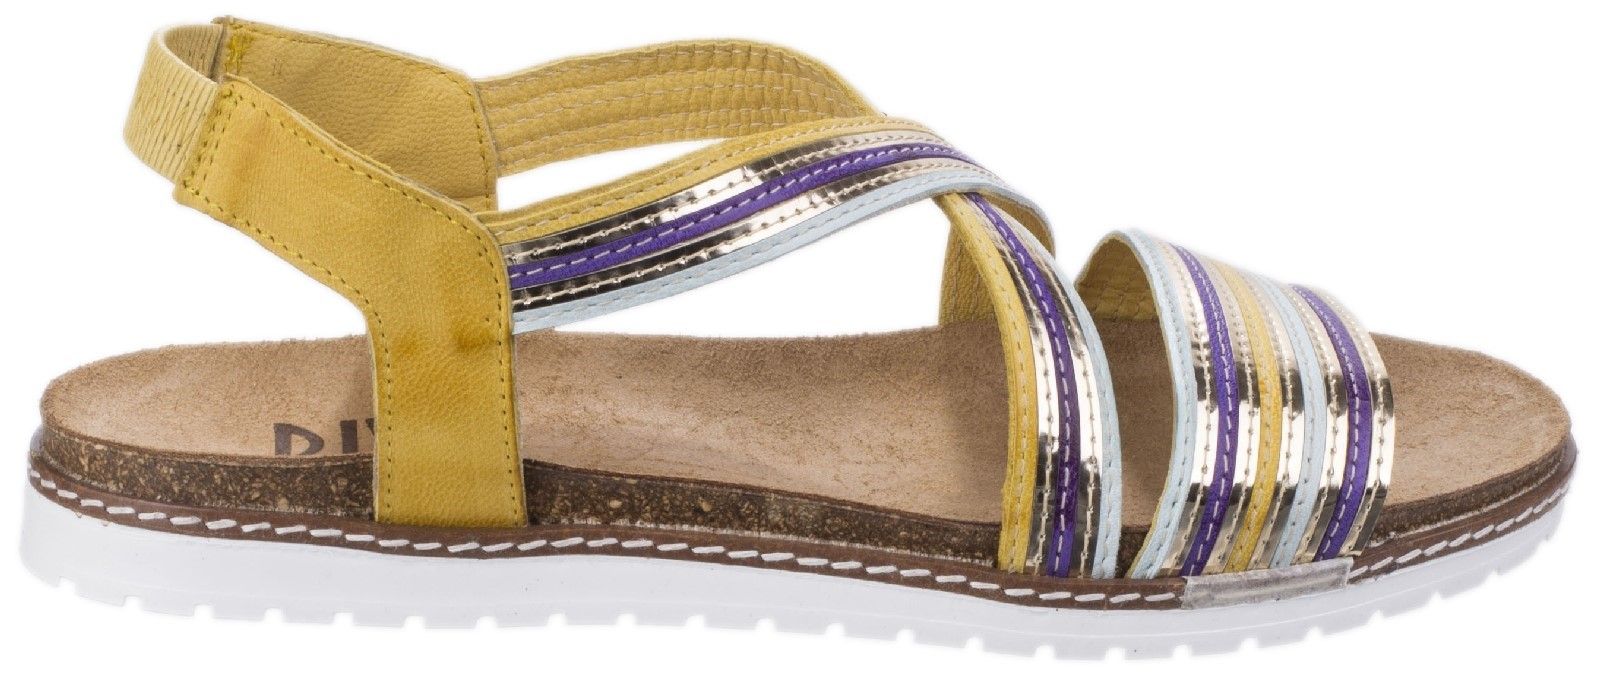 Spring into summer with these colourful multi-leather sandals from Riva.  A leather lined footbed cushions the feet ideal for your summer vacations. Slip-on open-toe sandal design. 
Crafted with a luxury multi-leather upper. 
Flexible cross-over mule strap. 
Sling back strap with elasticated comfort fit. 
Ergonomically shaped leather lined footbed.